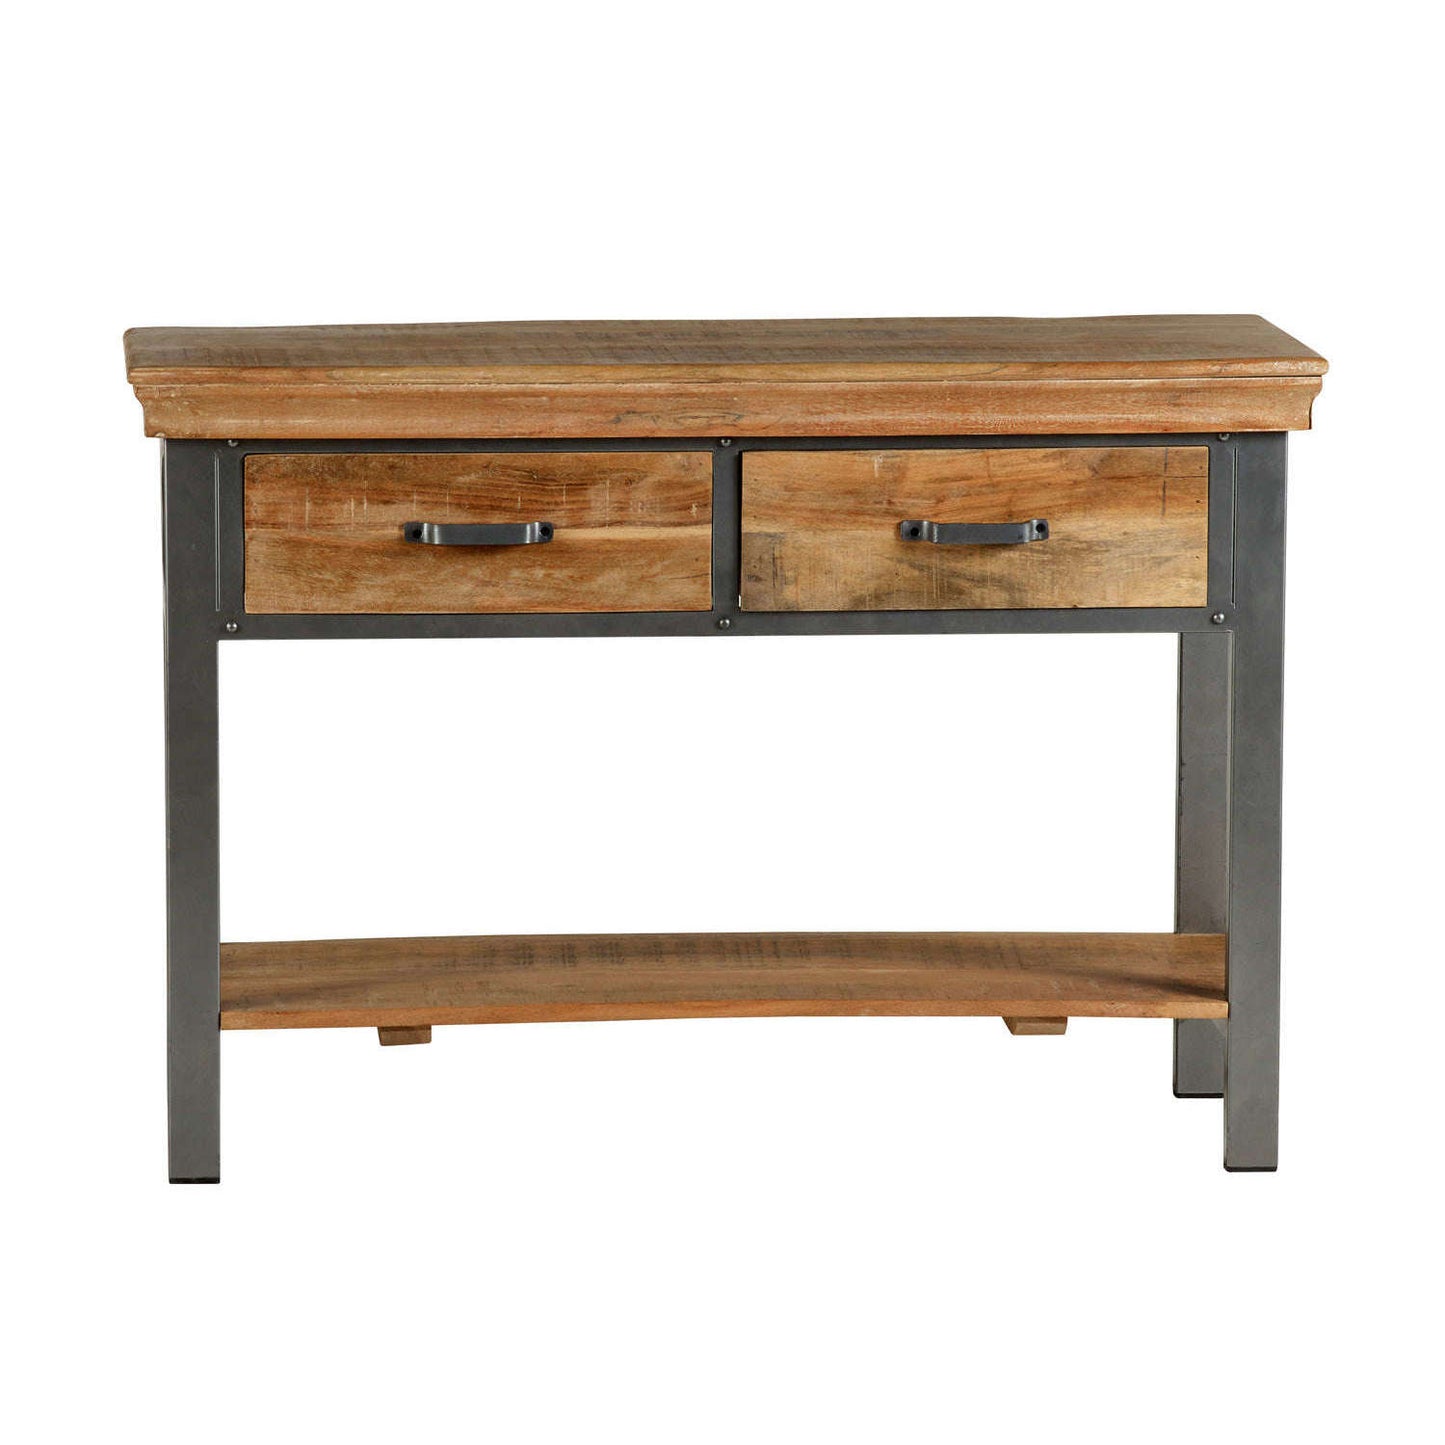 Ashpinoke:2 Drawer Console Table,Console and Hall Tables,Indian Hub